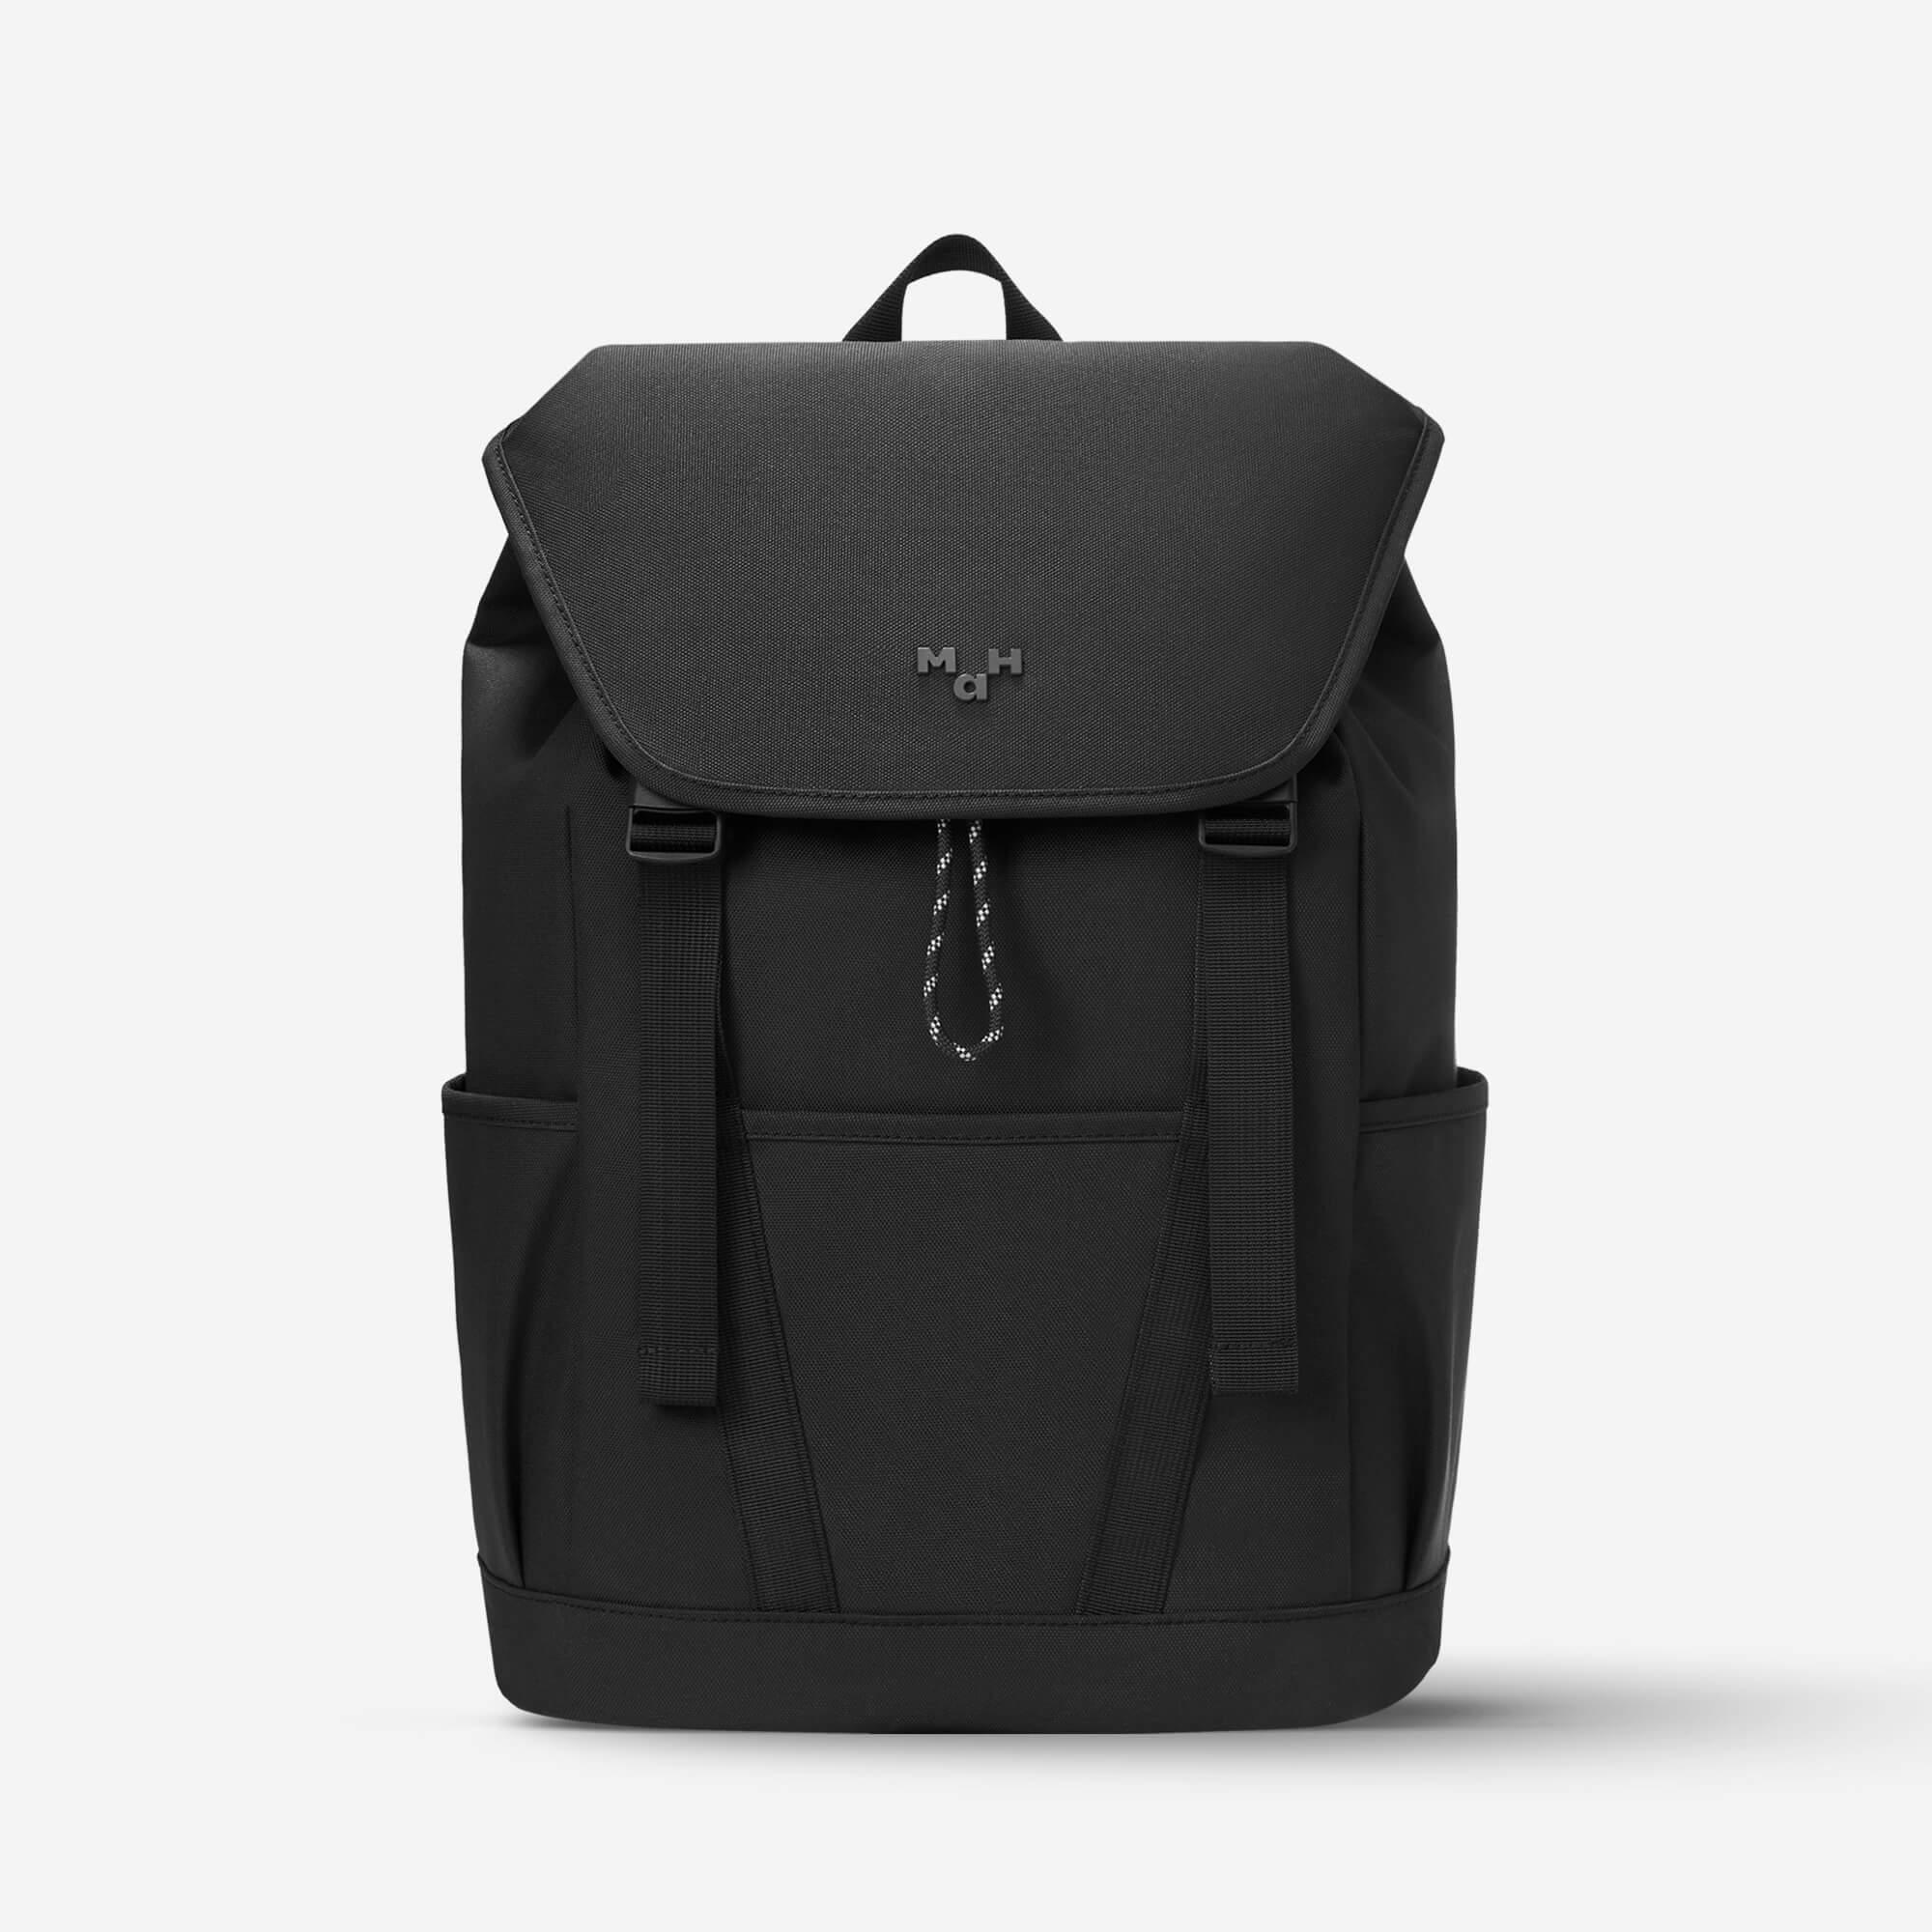 Traveling Backpack With Drawstring - Black